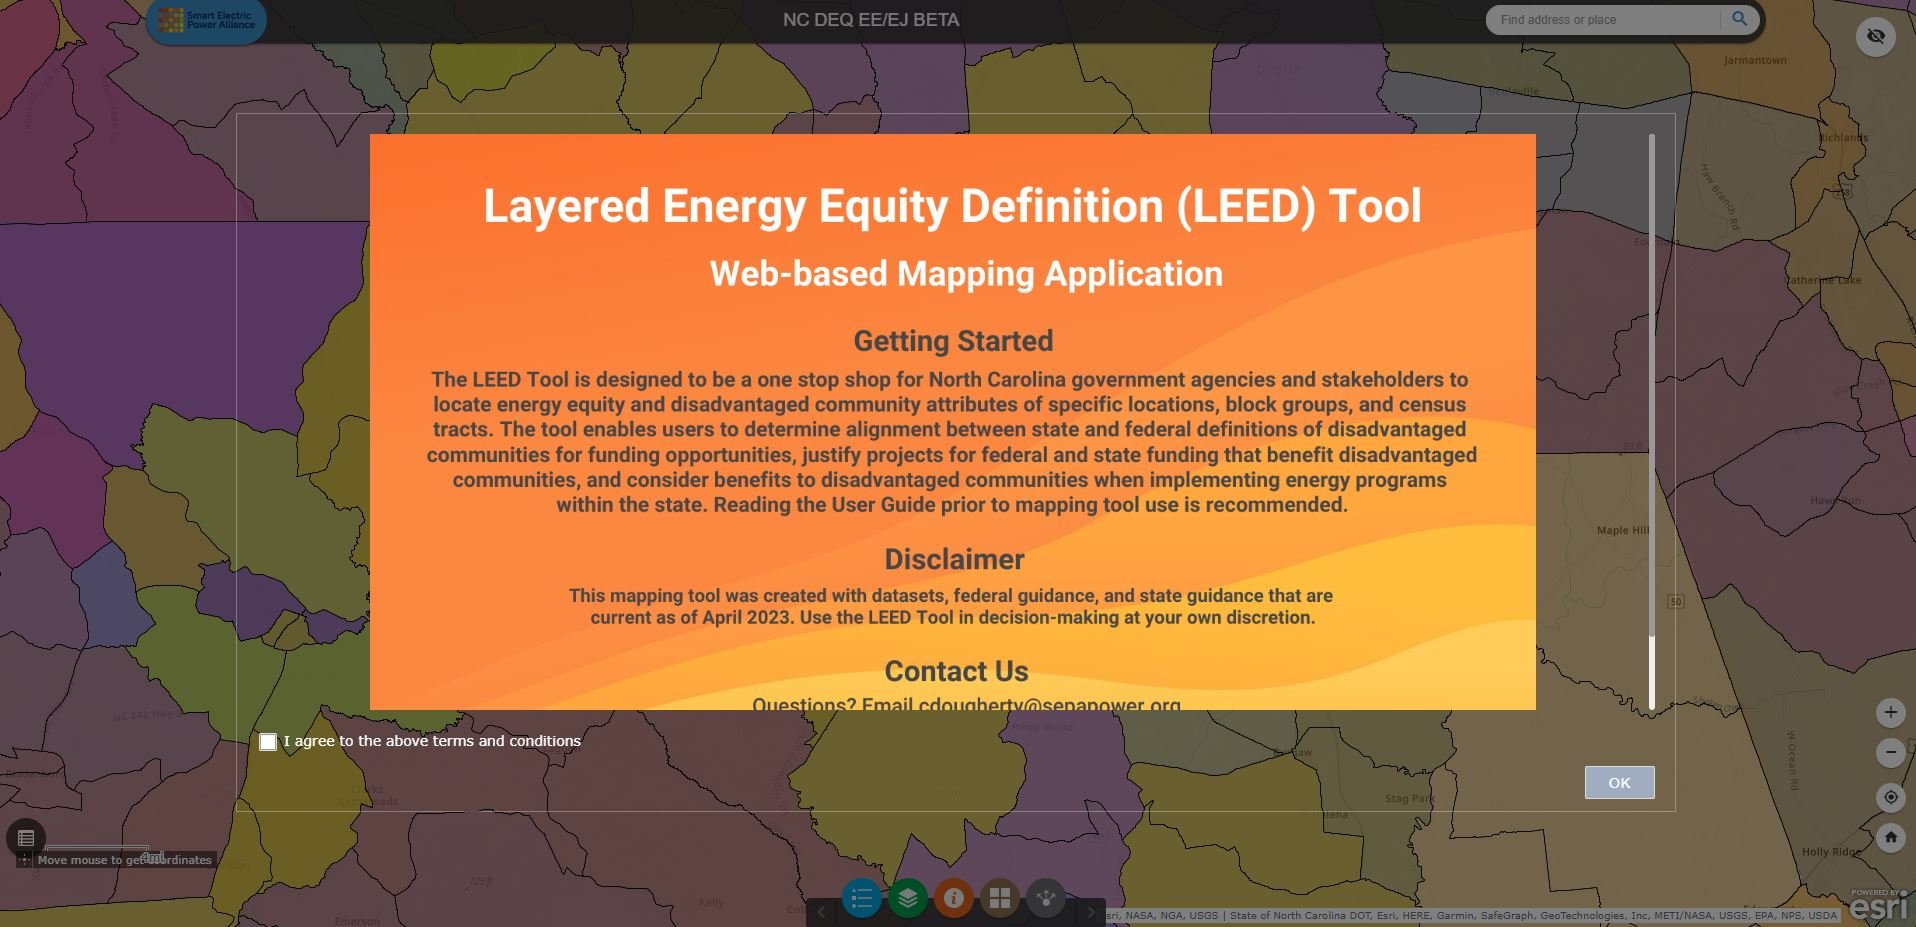 SEPA’s Layered Energy Equity Definition Tool